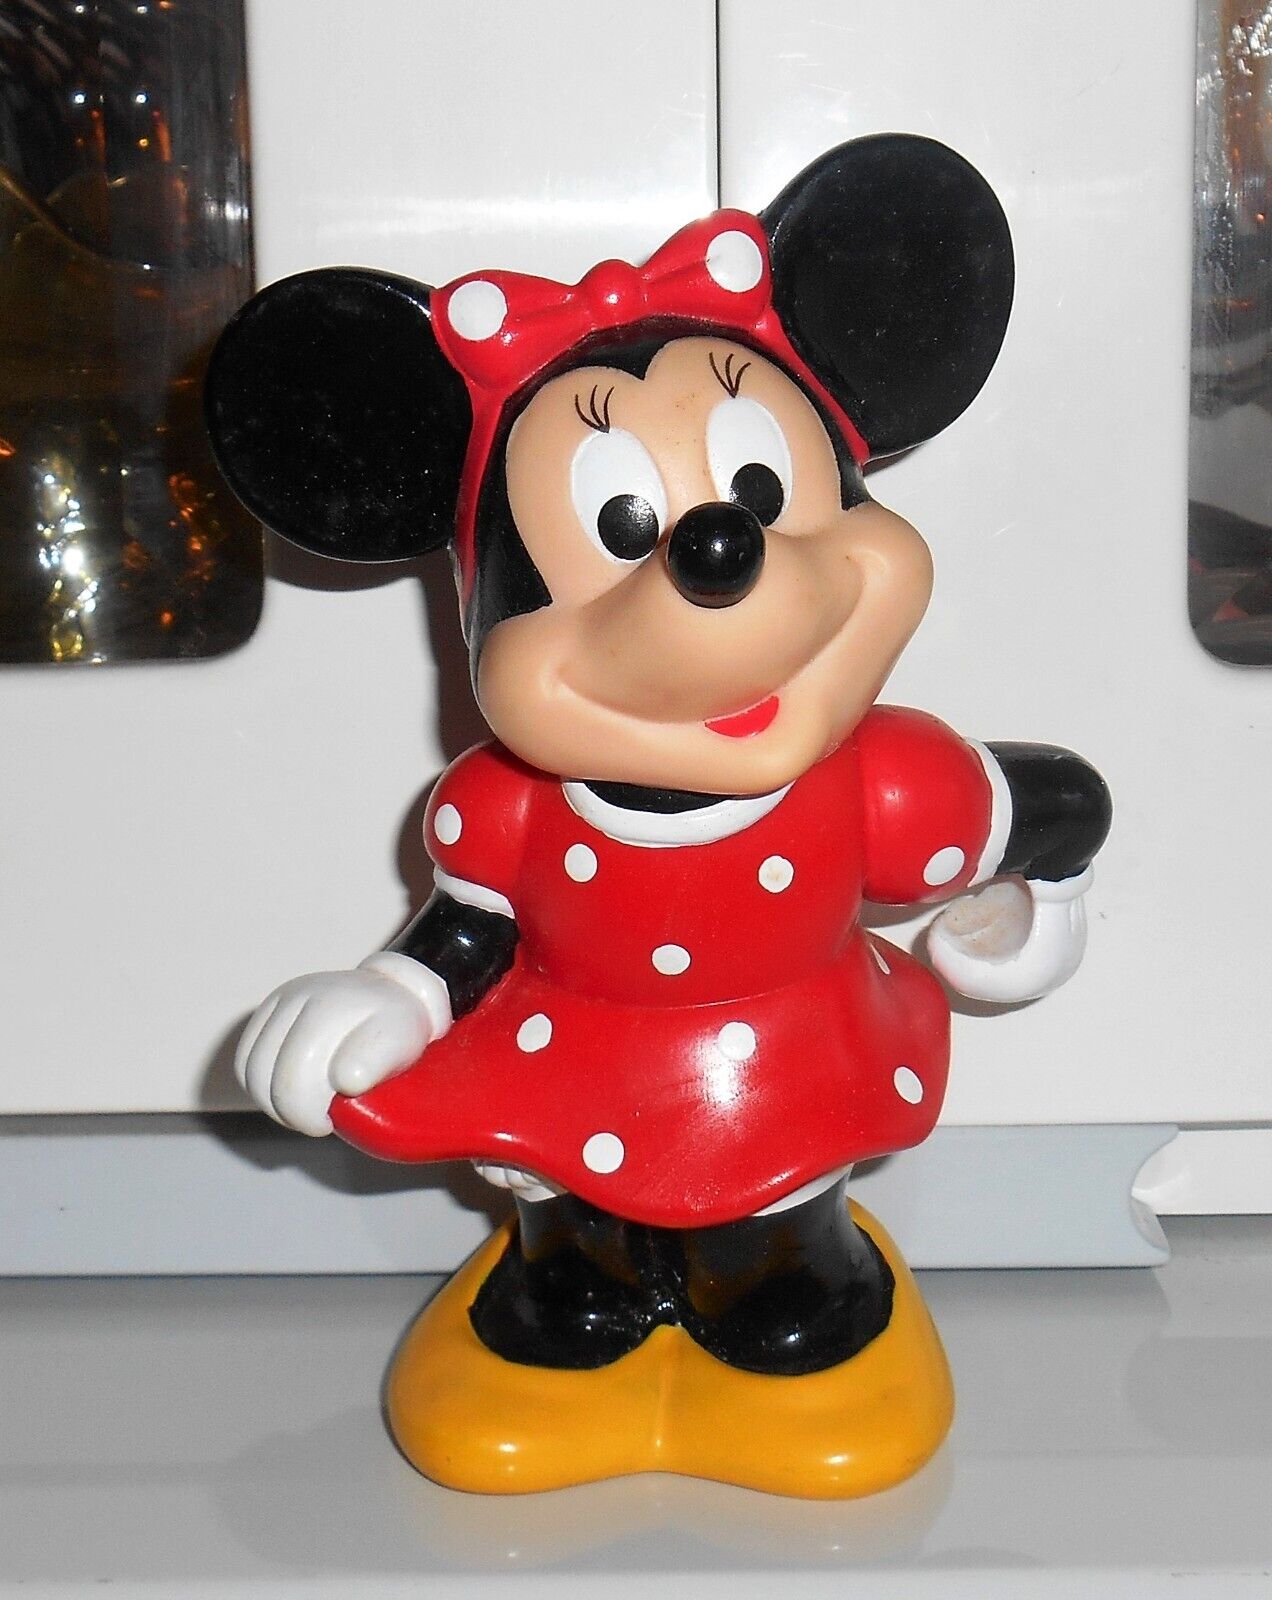 Vintage Minnie Mouse Coin Bank Hard Plastic 6" Red Dress W Polka Dots